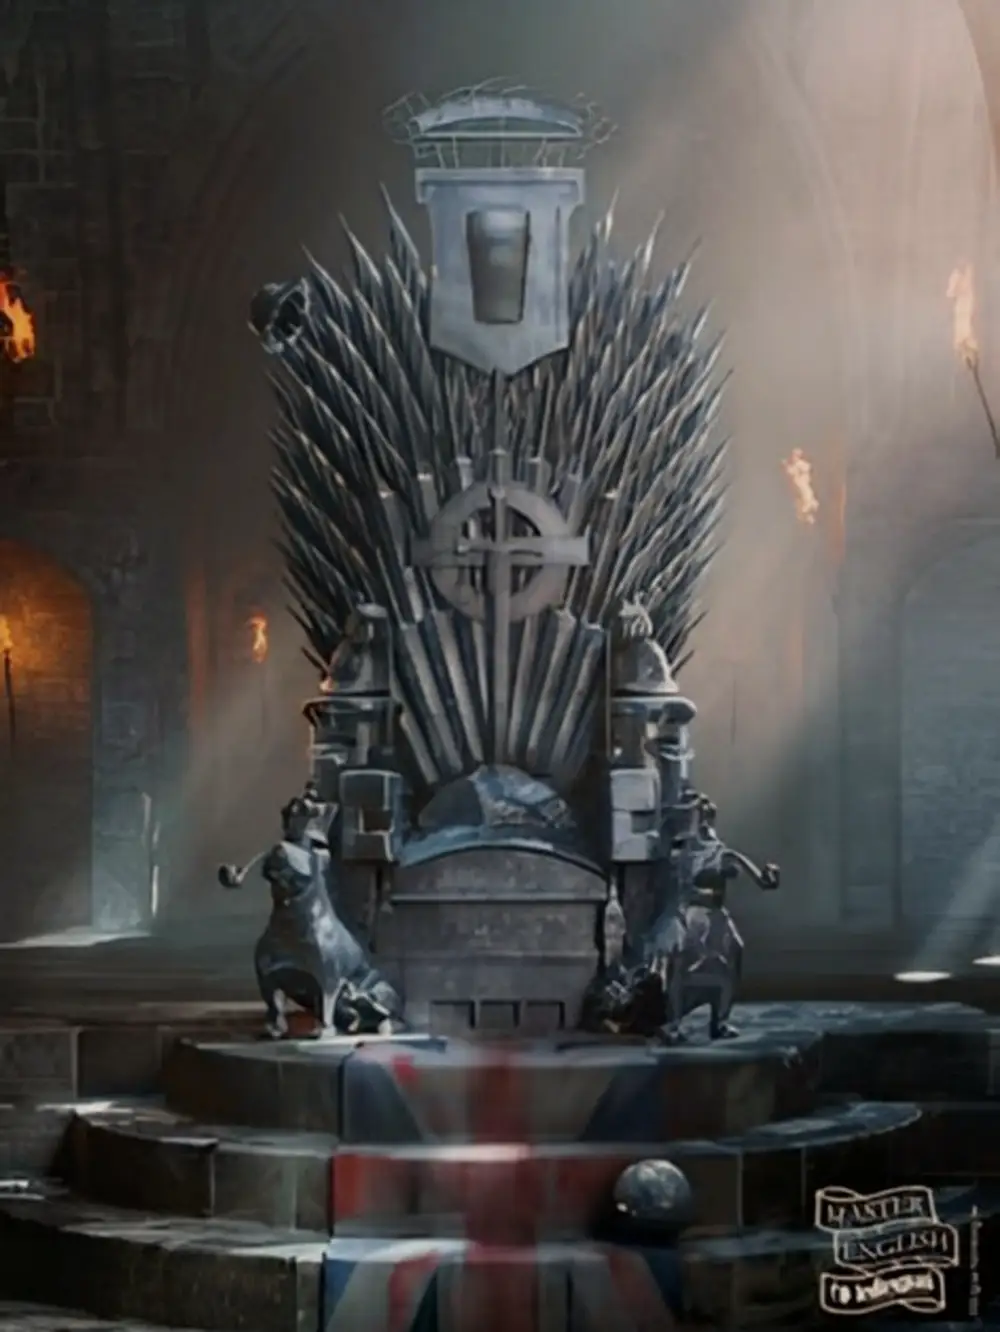 You are currently viewing King throne background for picsart editing